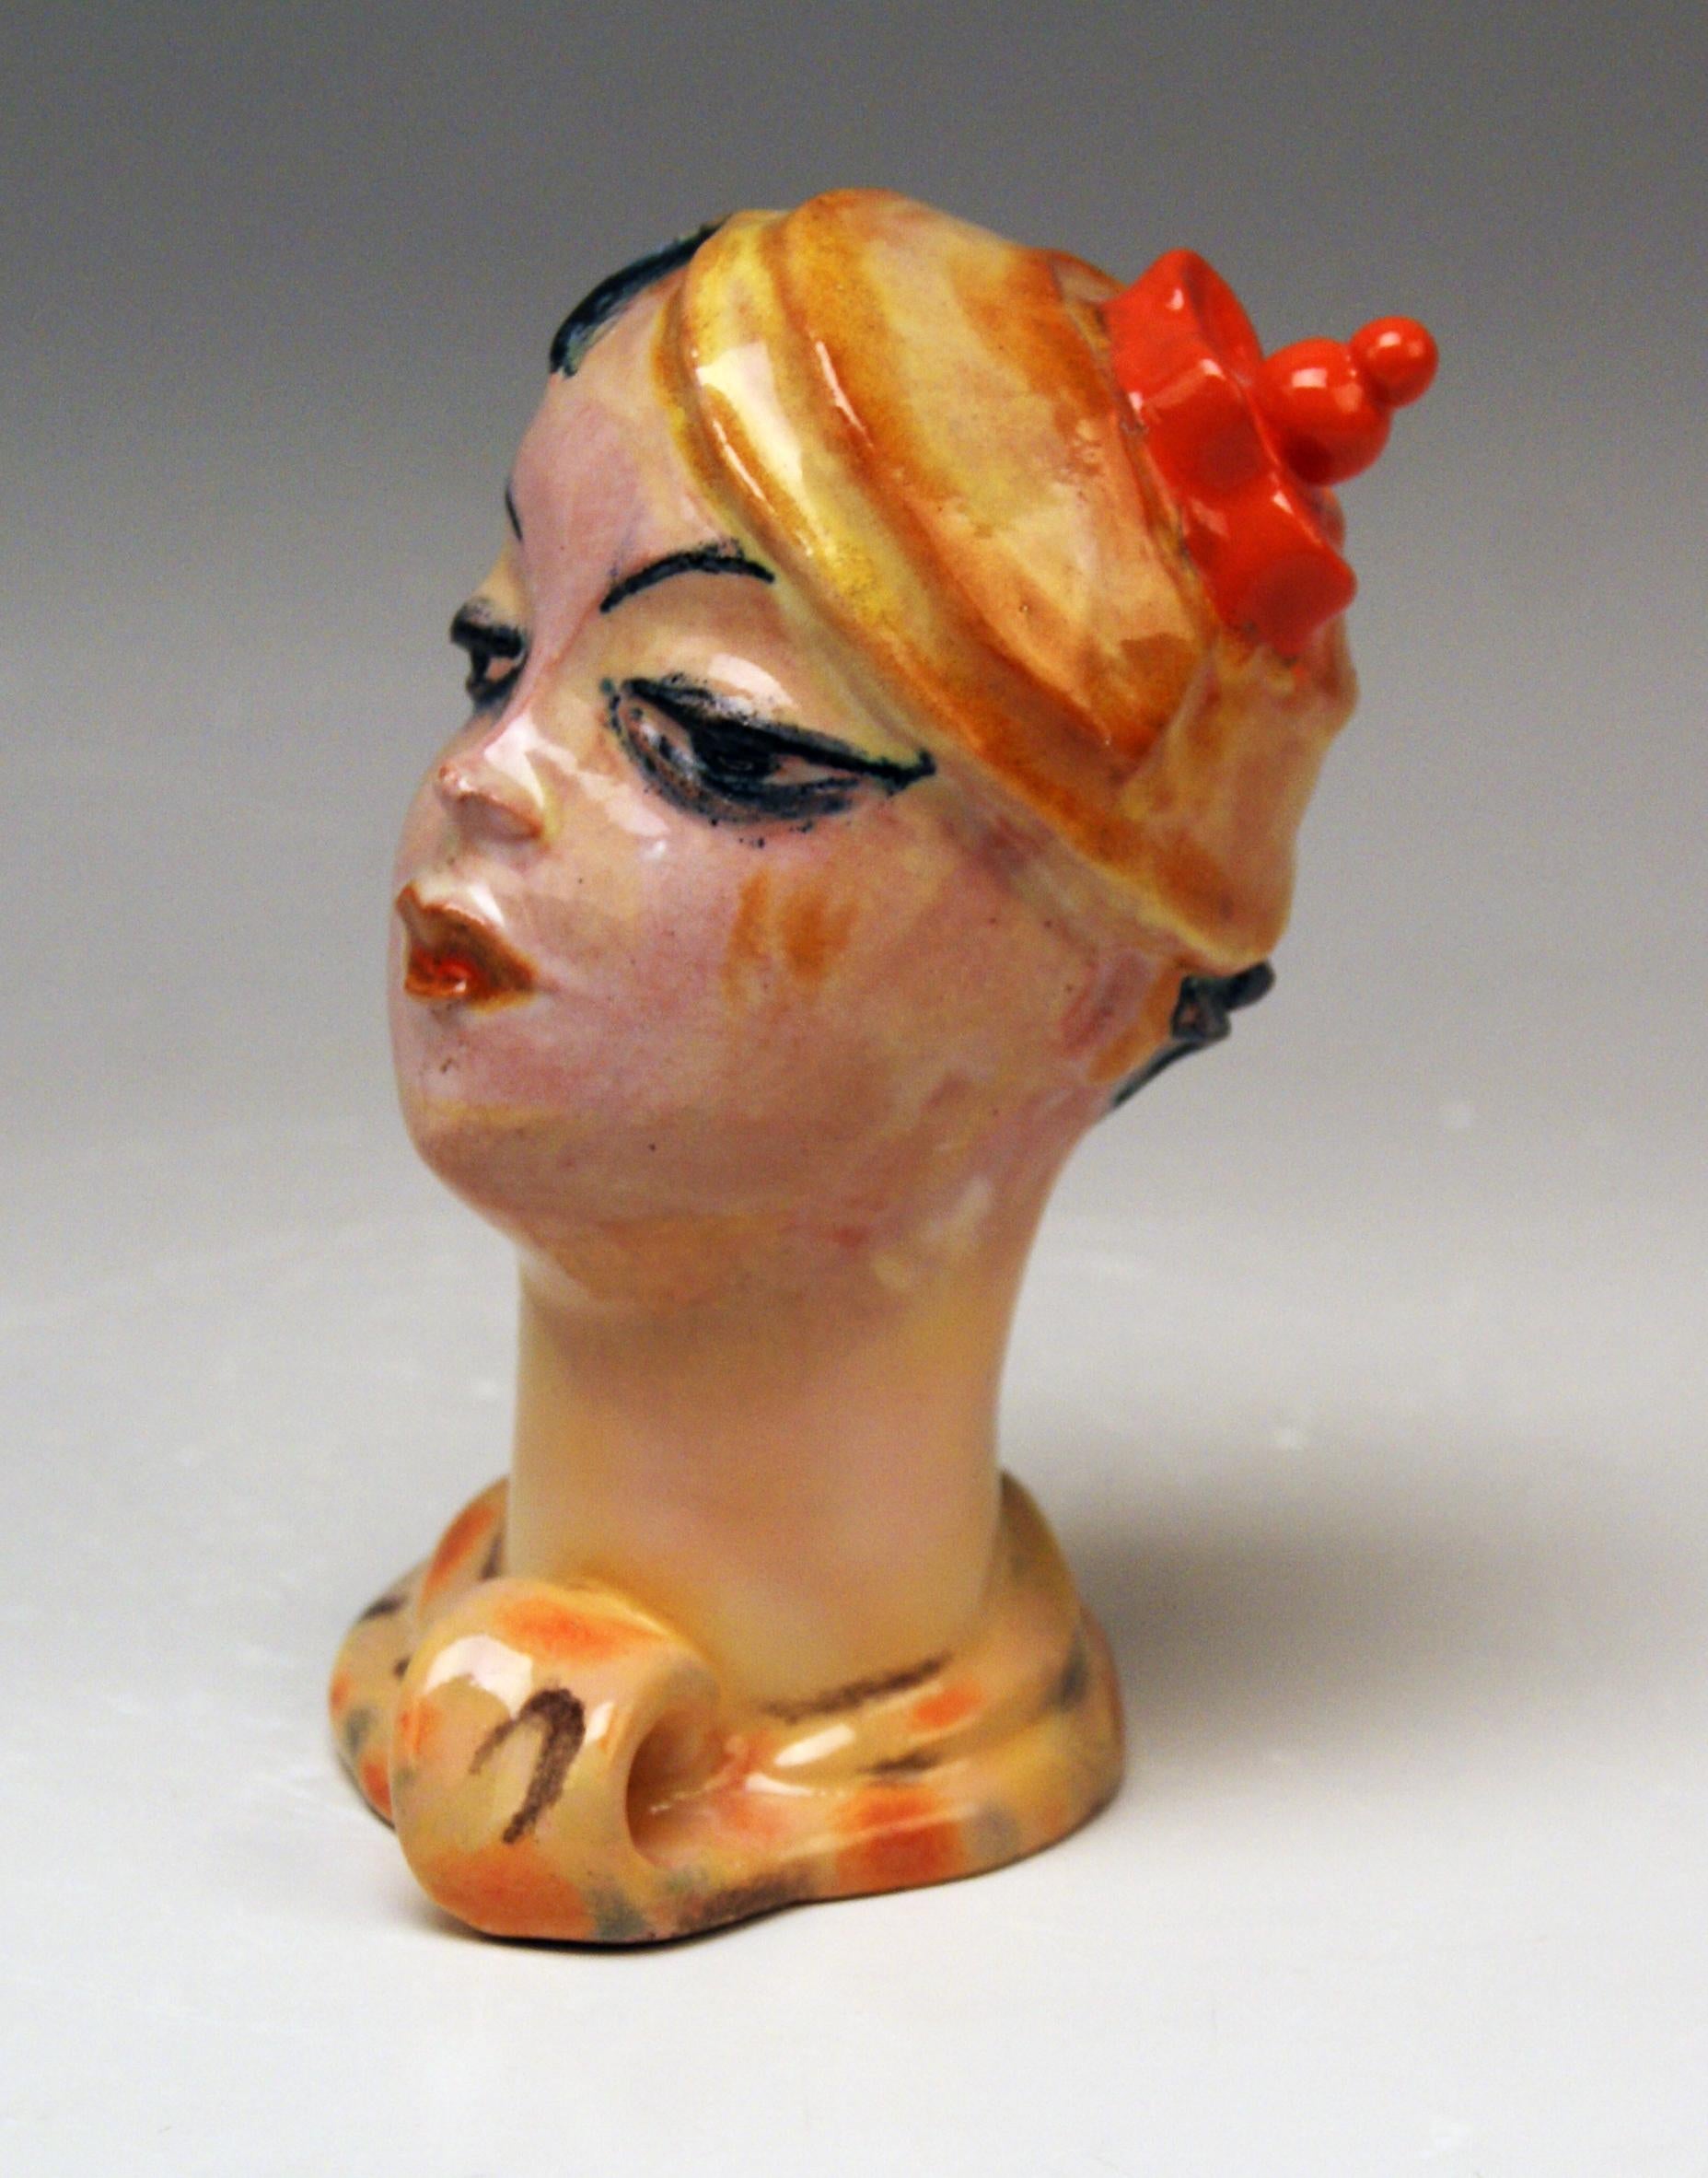 Sculptured Female Head made in excellent style of Expressionism, designed by Vally Wieselthier (1895-1945)
made circa 1928
red earthenware, multicolored painted and glazed (= colored via on-glaze paints)

It is a sculptured female head attached